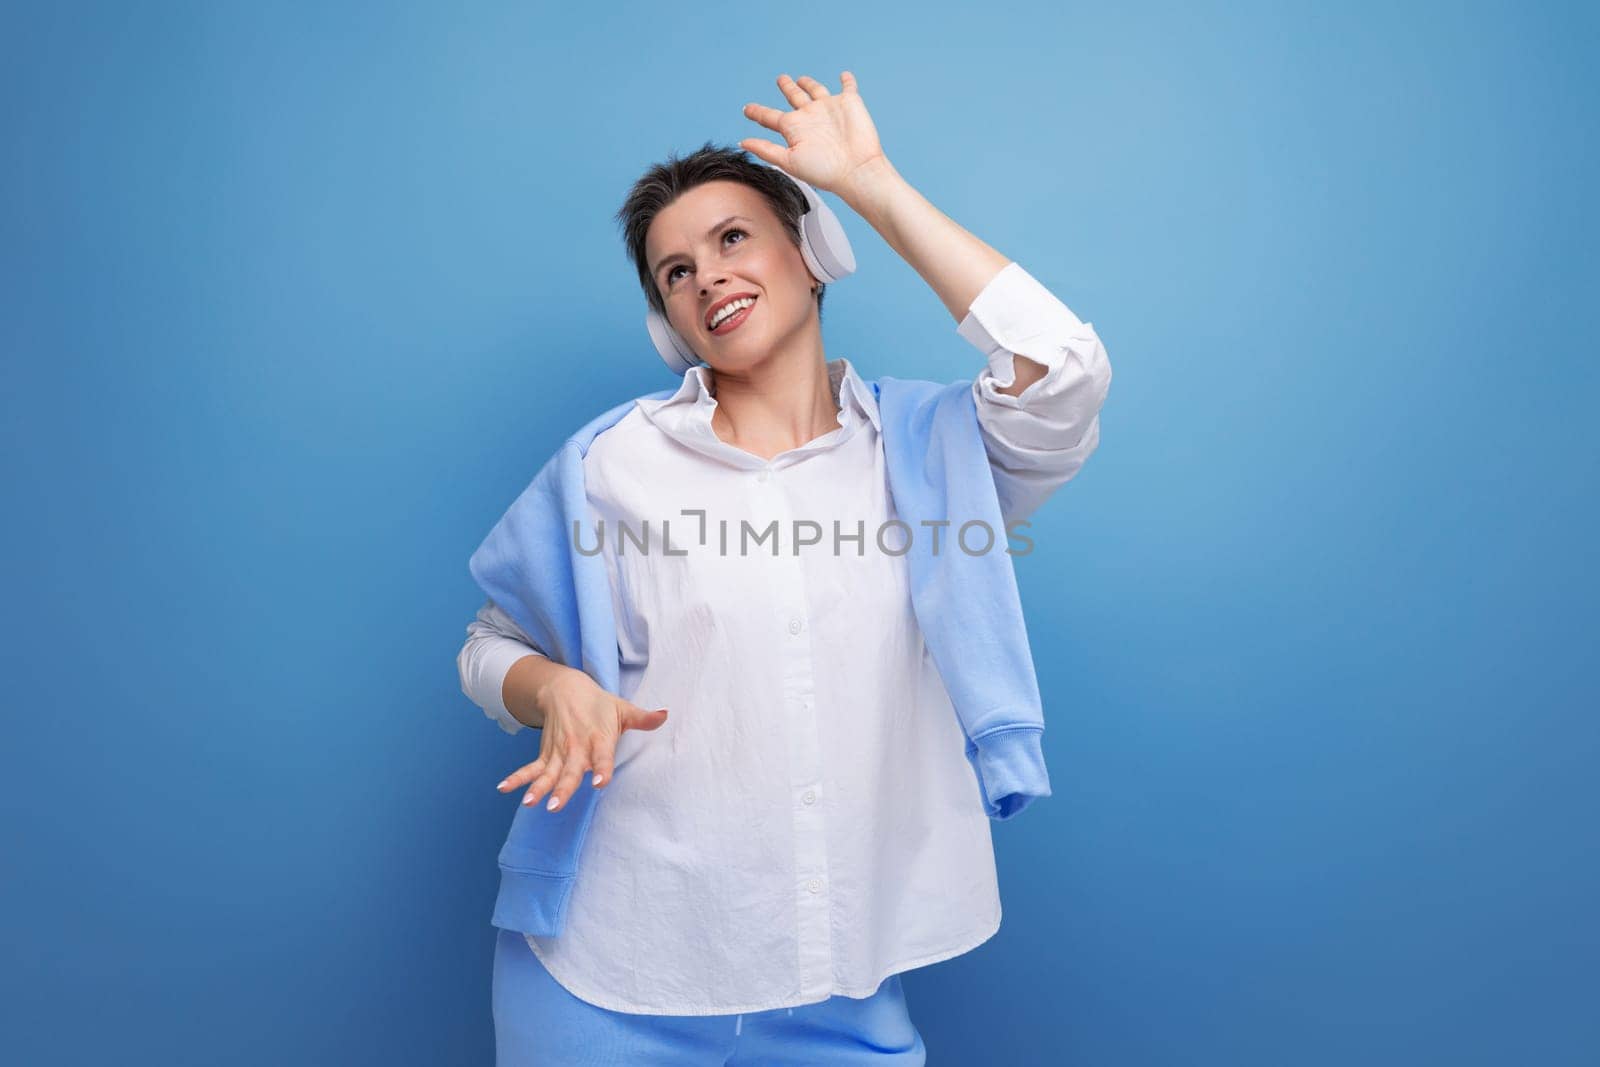 stylish young woman with short haircut enjoying music in headphones on studio background with copy space by TRMK